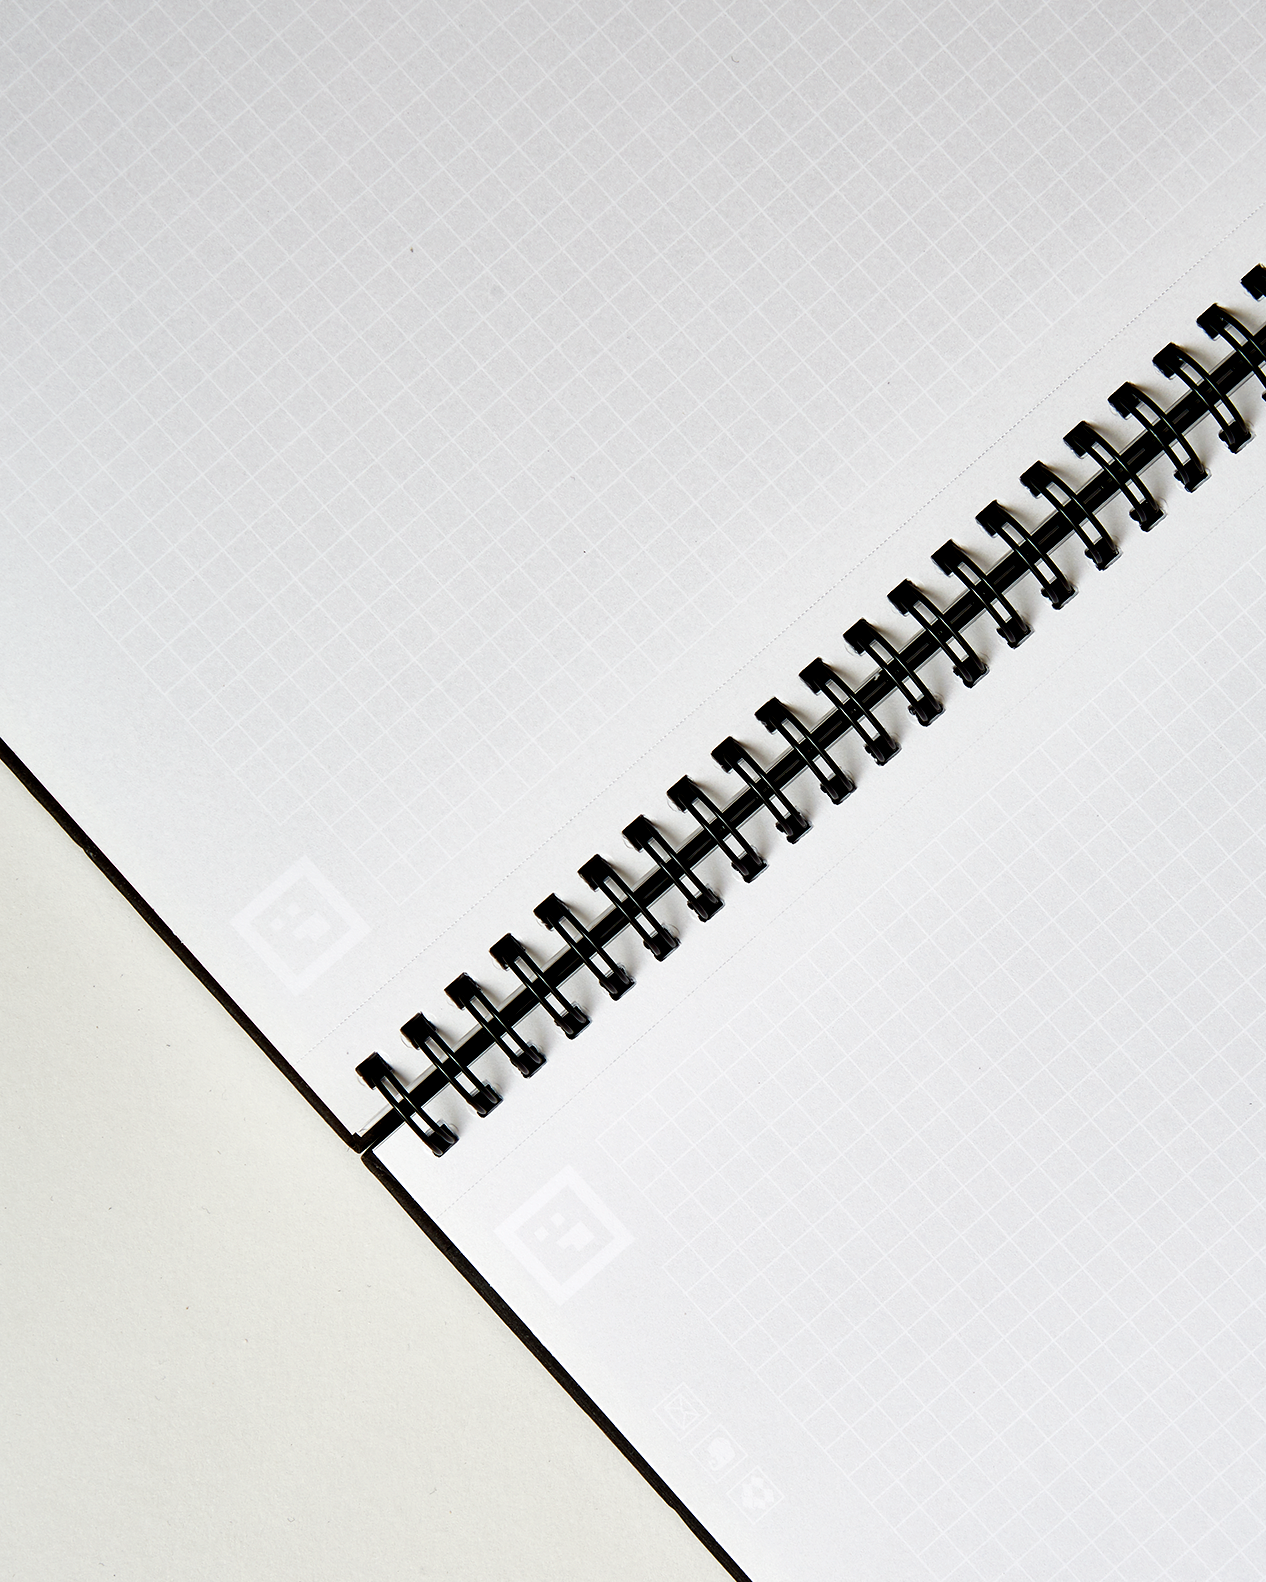 Whitelines Large (A4) Spiral Bound Notebook - No Lines!